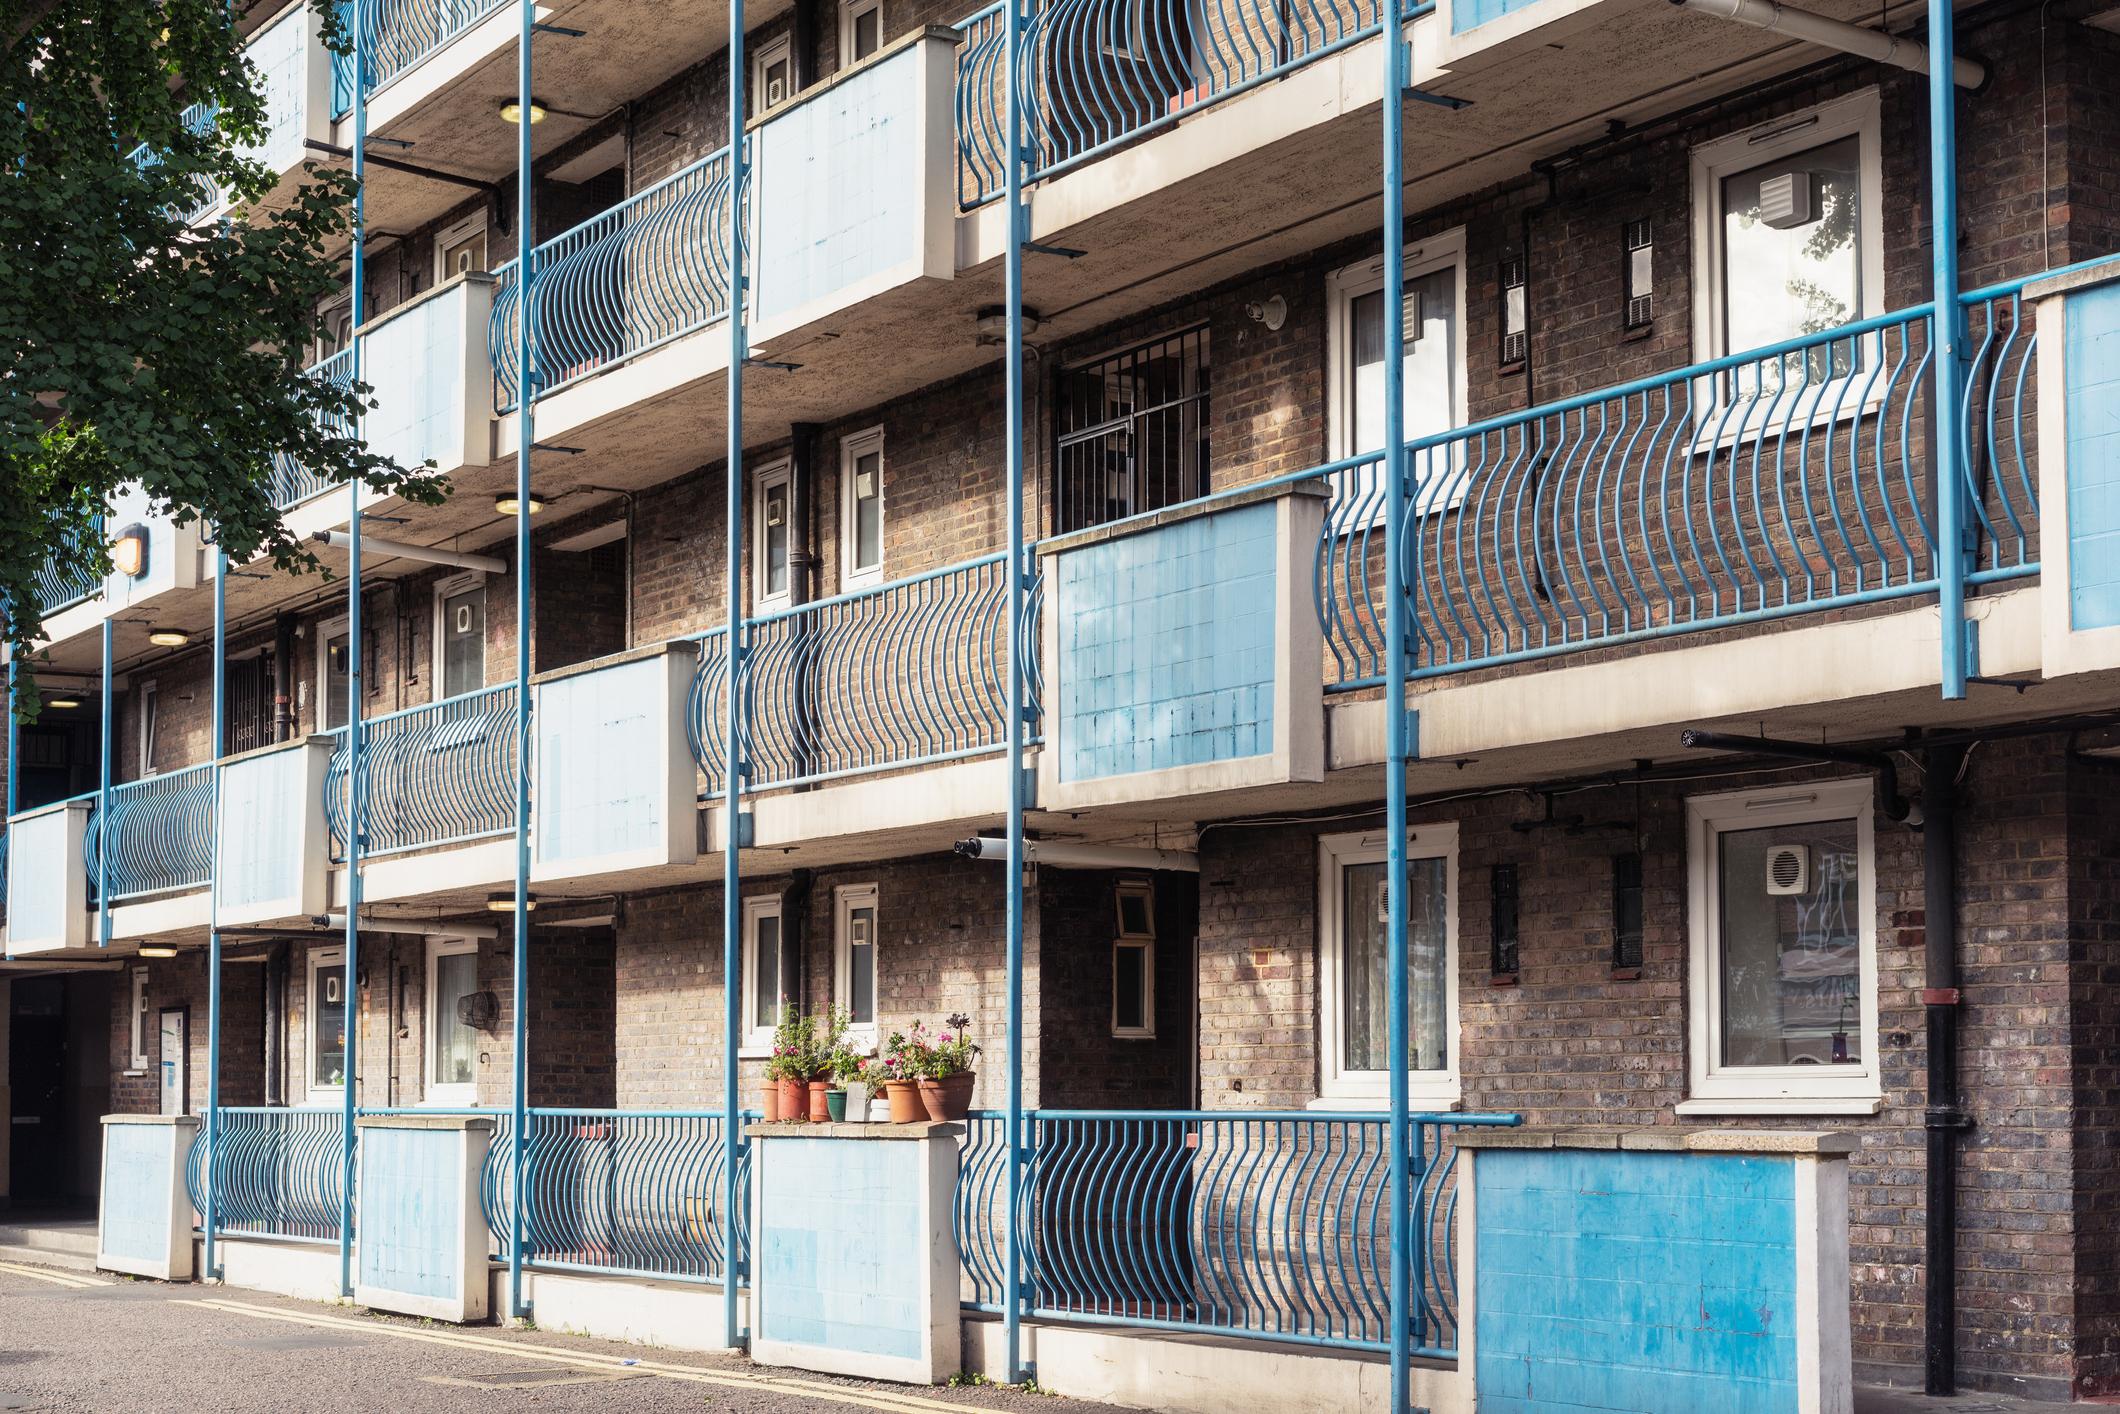 Apartments in a social housing block in east London